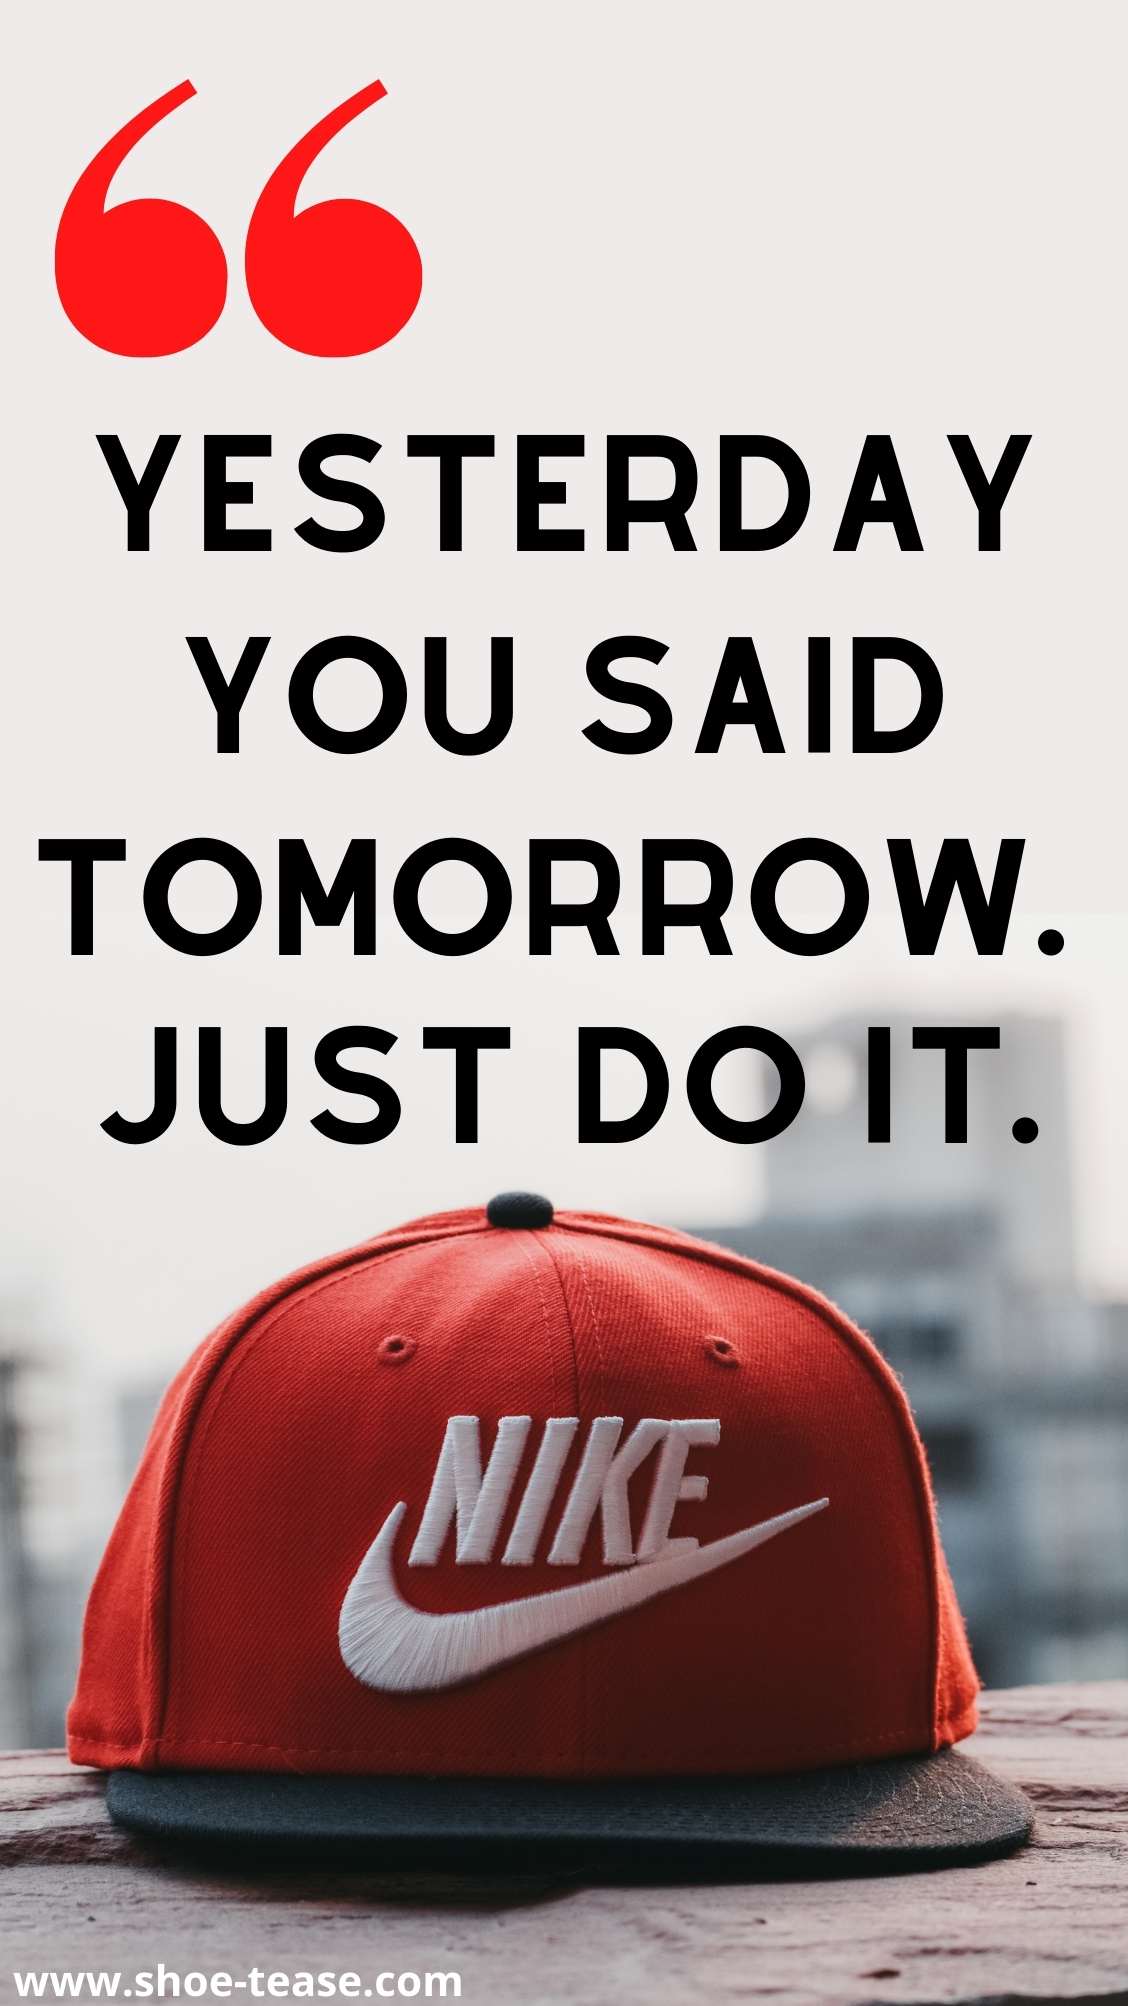 kupon buffet massefylde Over 100 Best Nike Quotes, Motivational Slogans and Sayings about Nike